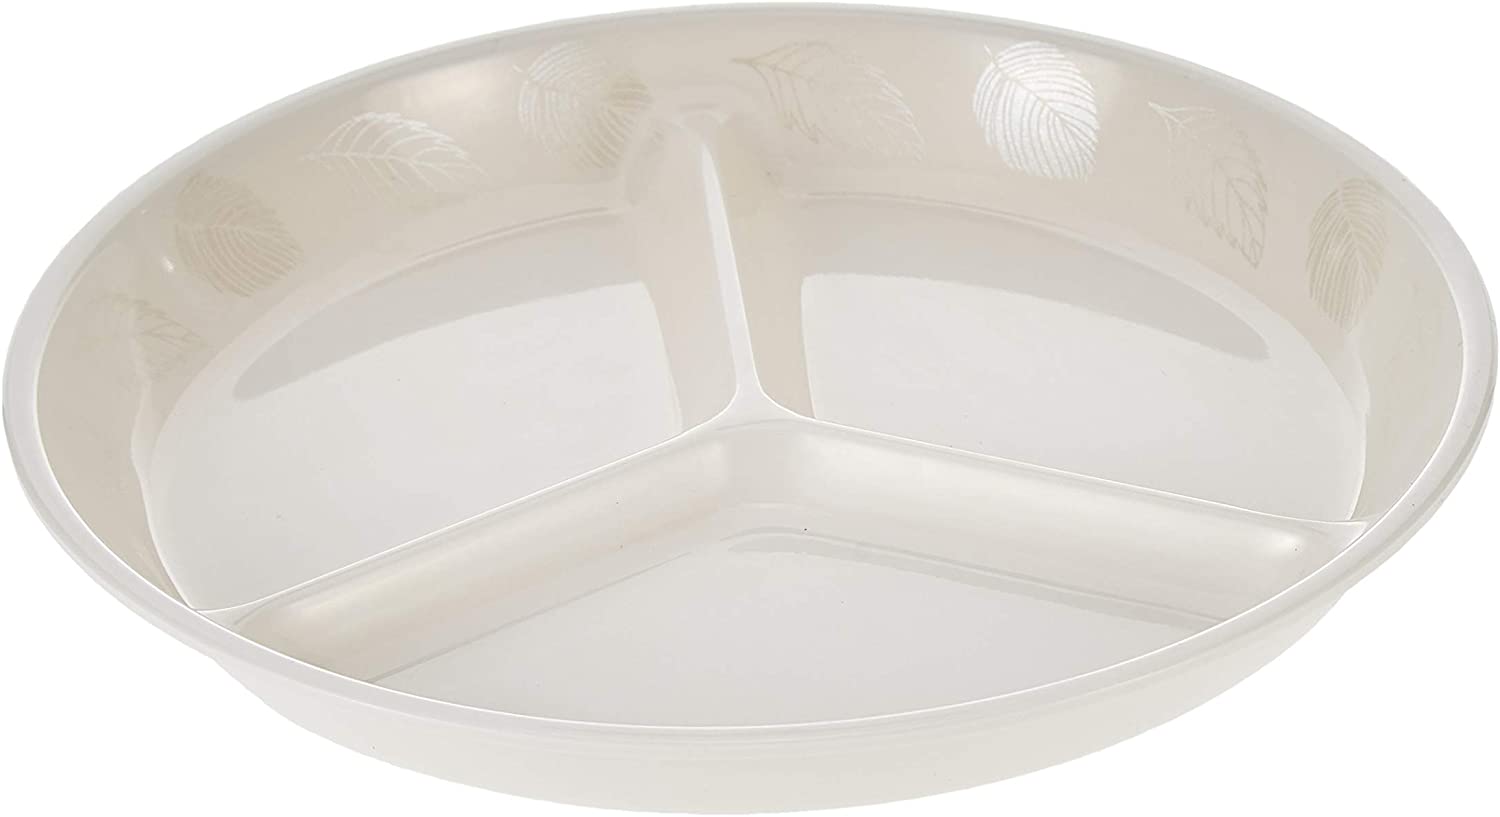 Flamingo Pearl Leaf Design 3 Section Plate White 7.5 Inches White